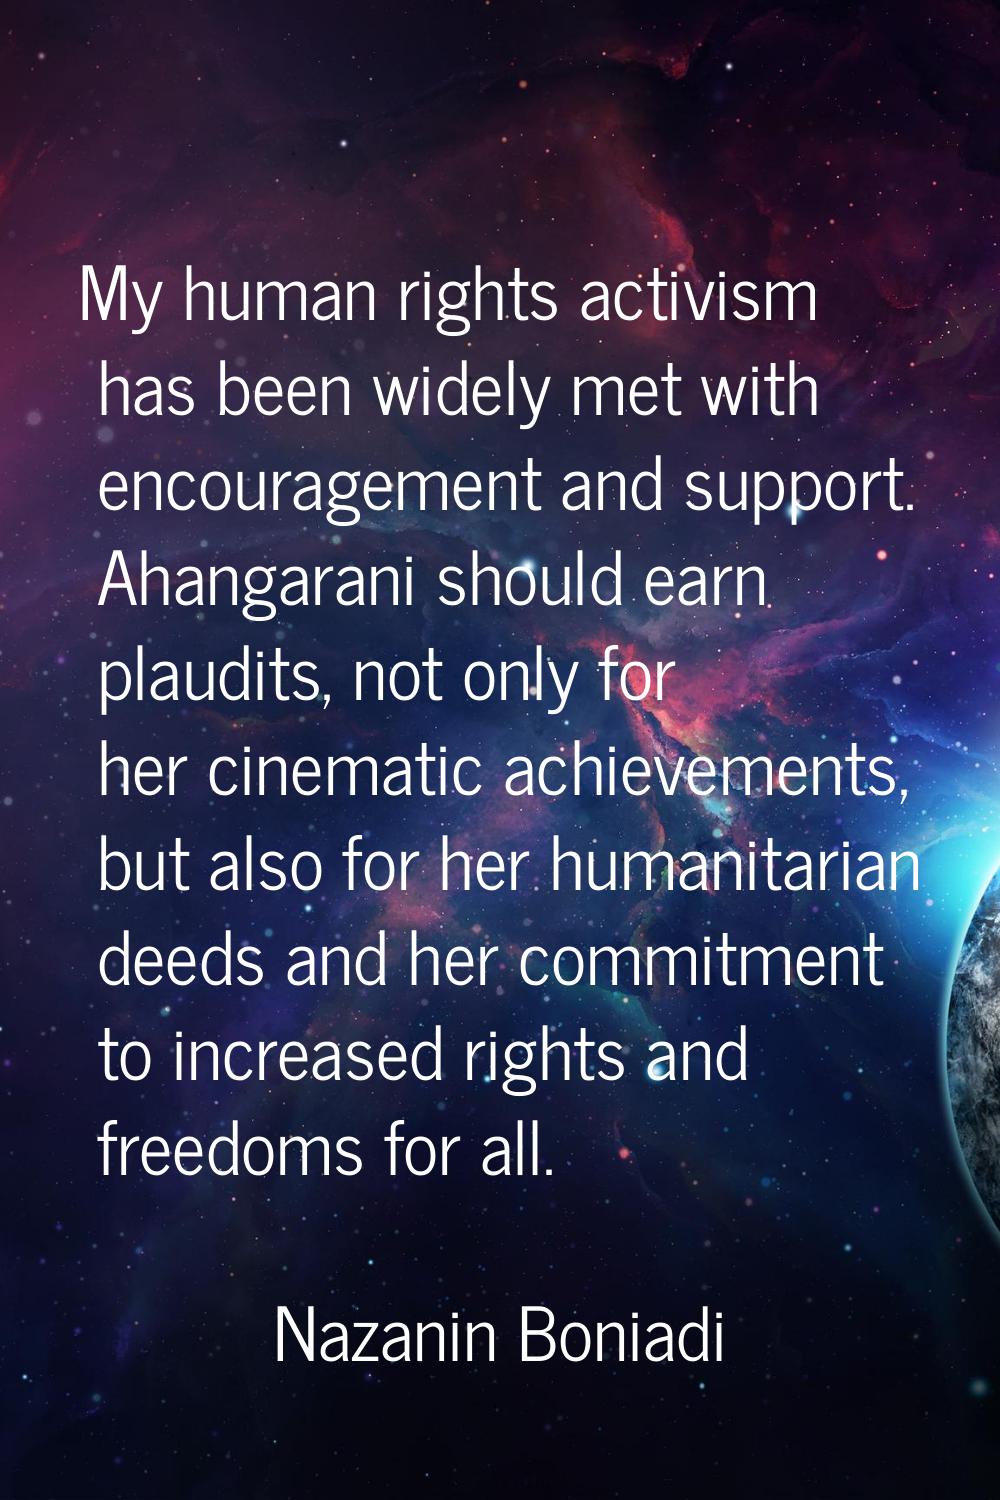 My human rights activism has been widely met with encouragement and support. Ahangarani should earn